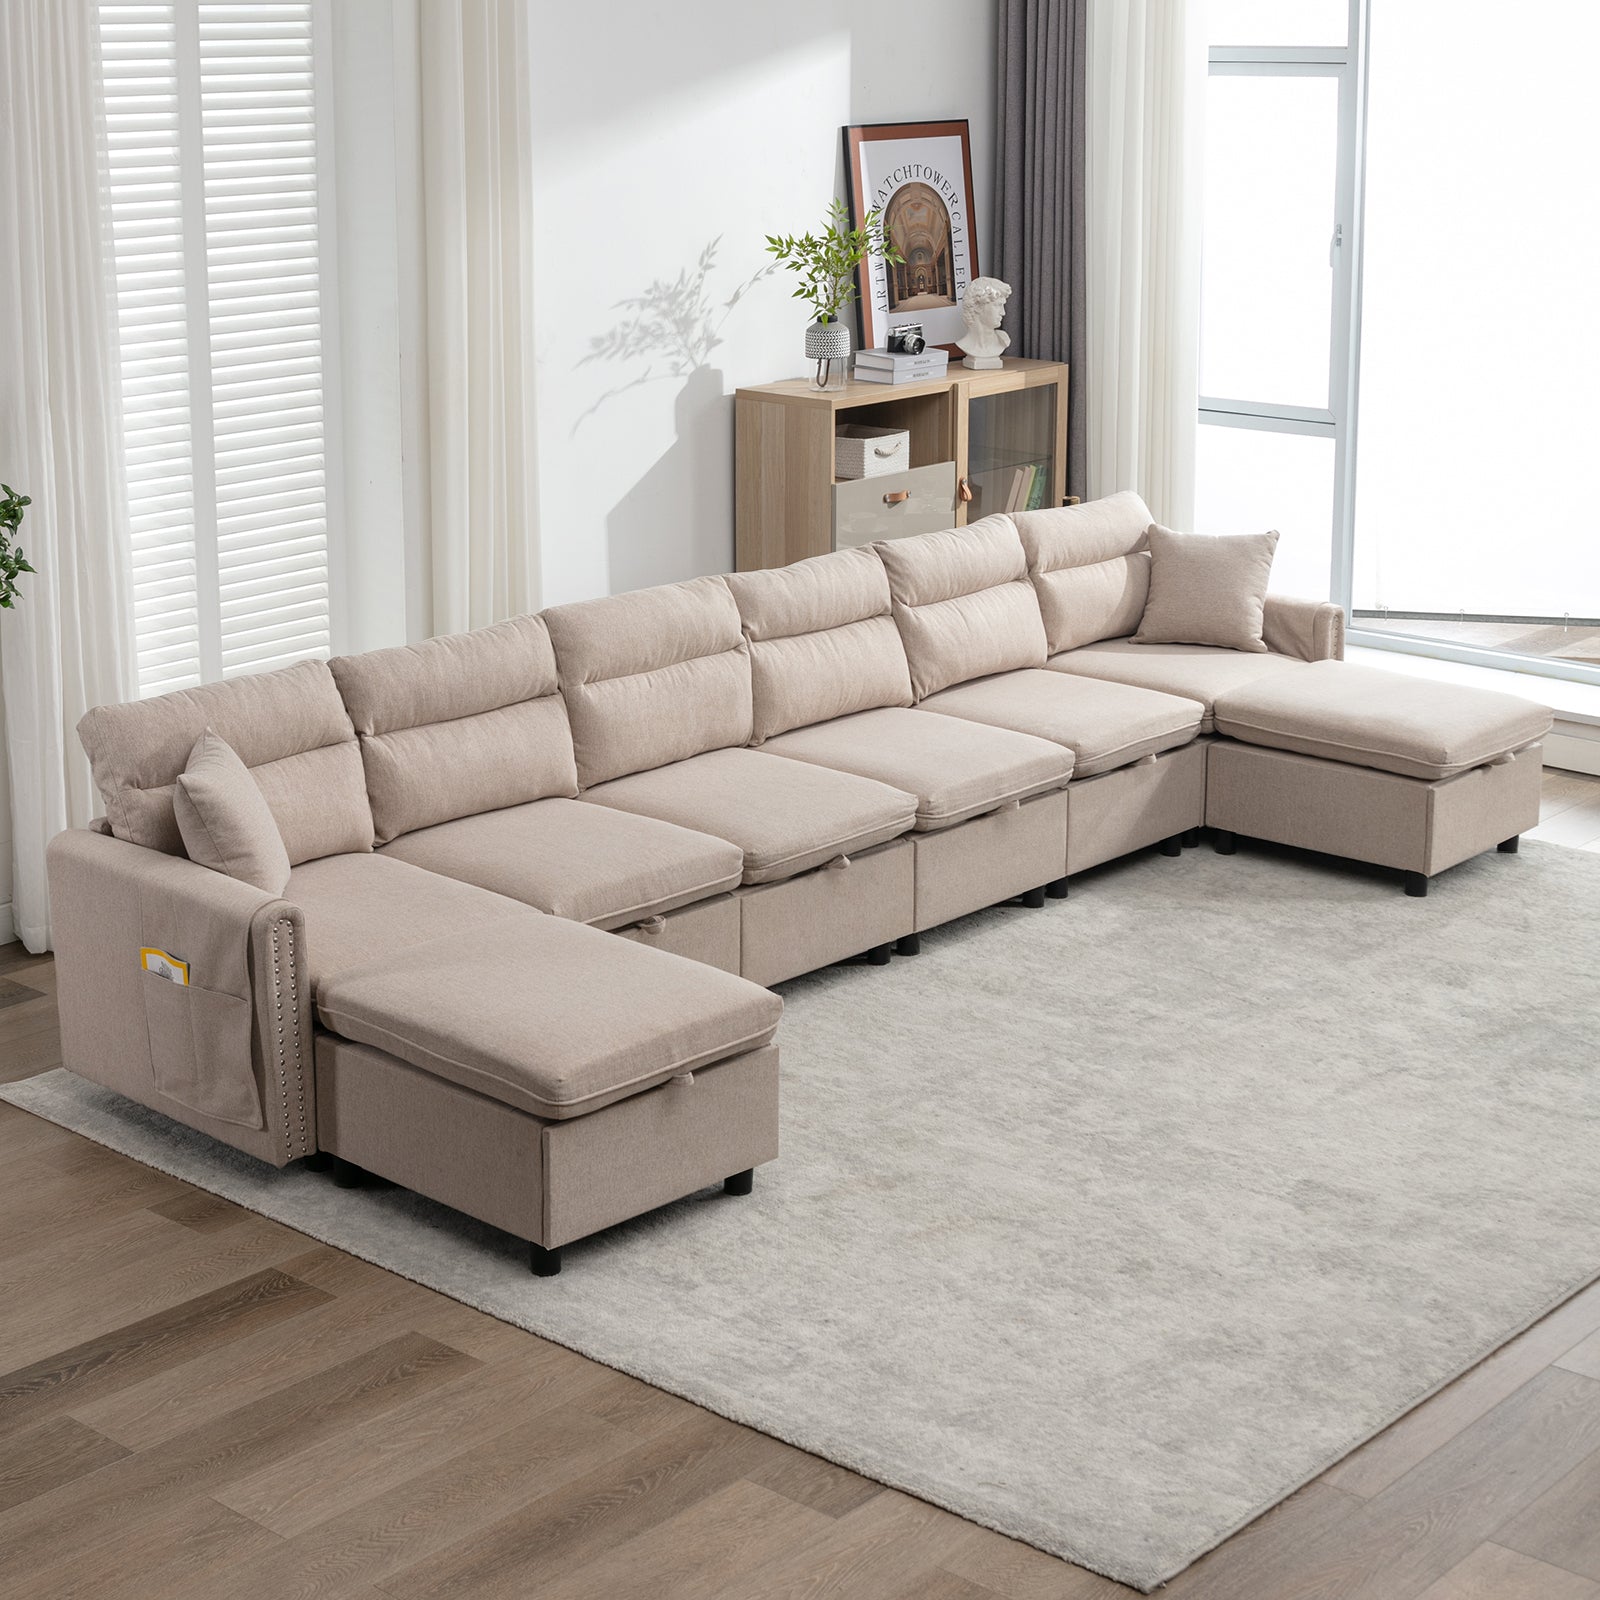 Mjkone Sectional Sofa with Storage Seat and Side Pockets, Sectional Couch with Reversible Chaise, Modular Sectional Sofa Set with Linen Upholstered, Modern Living Room Sets